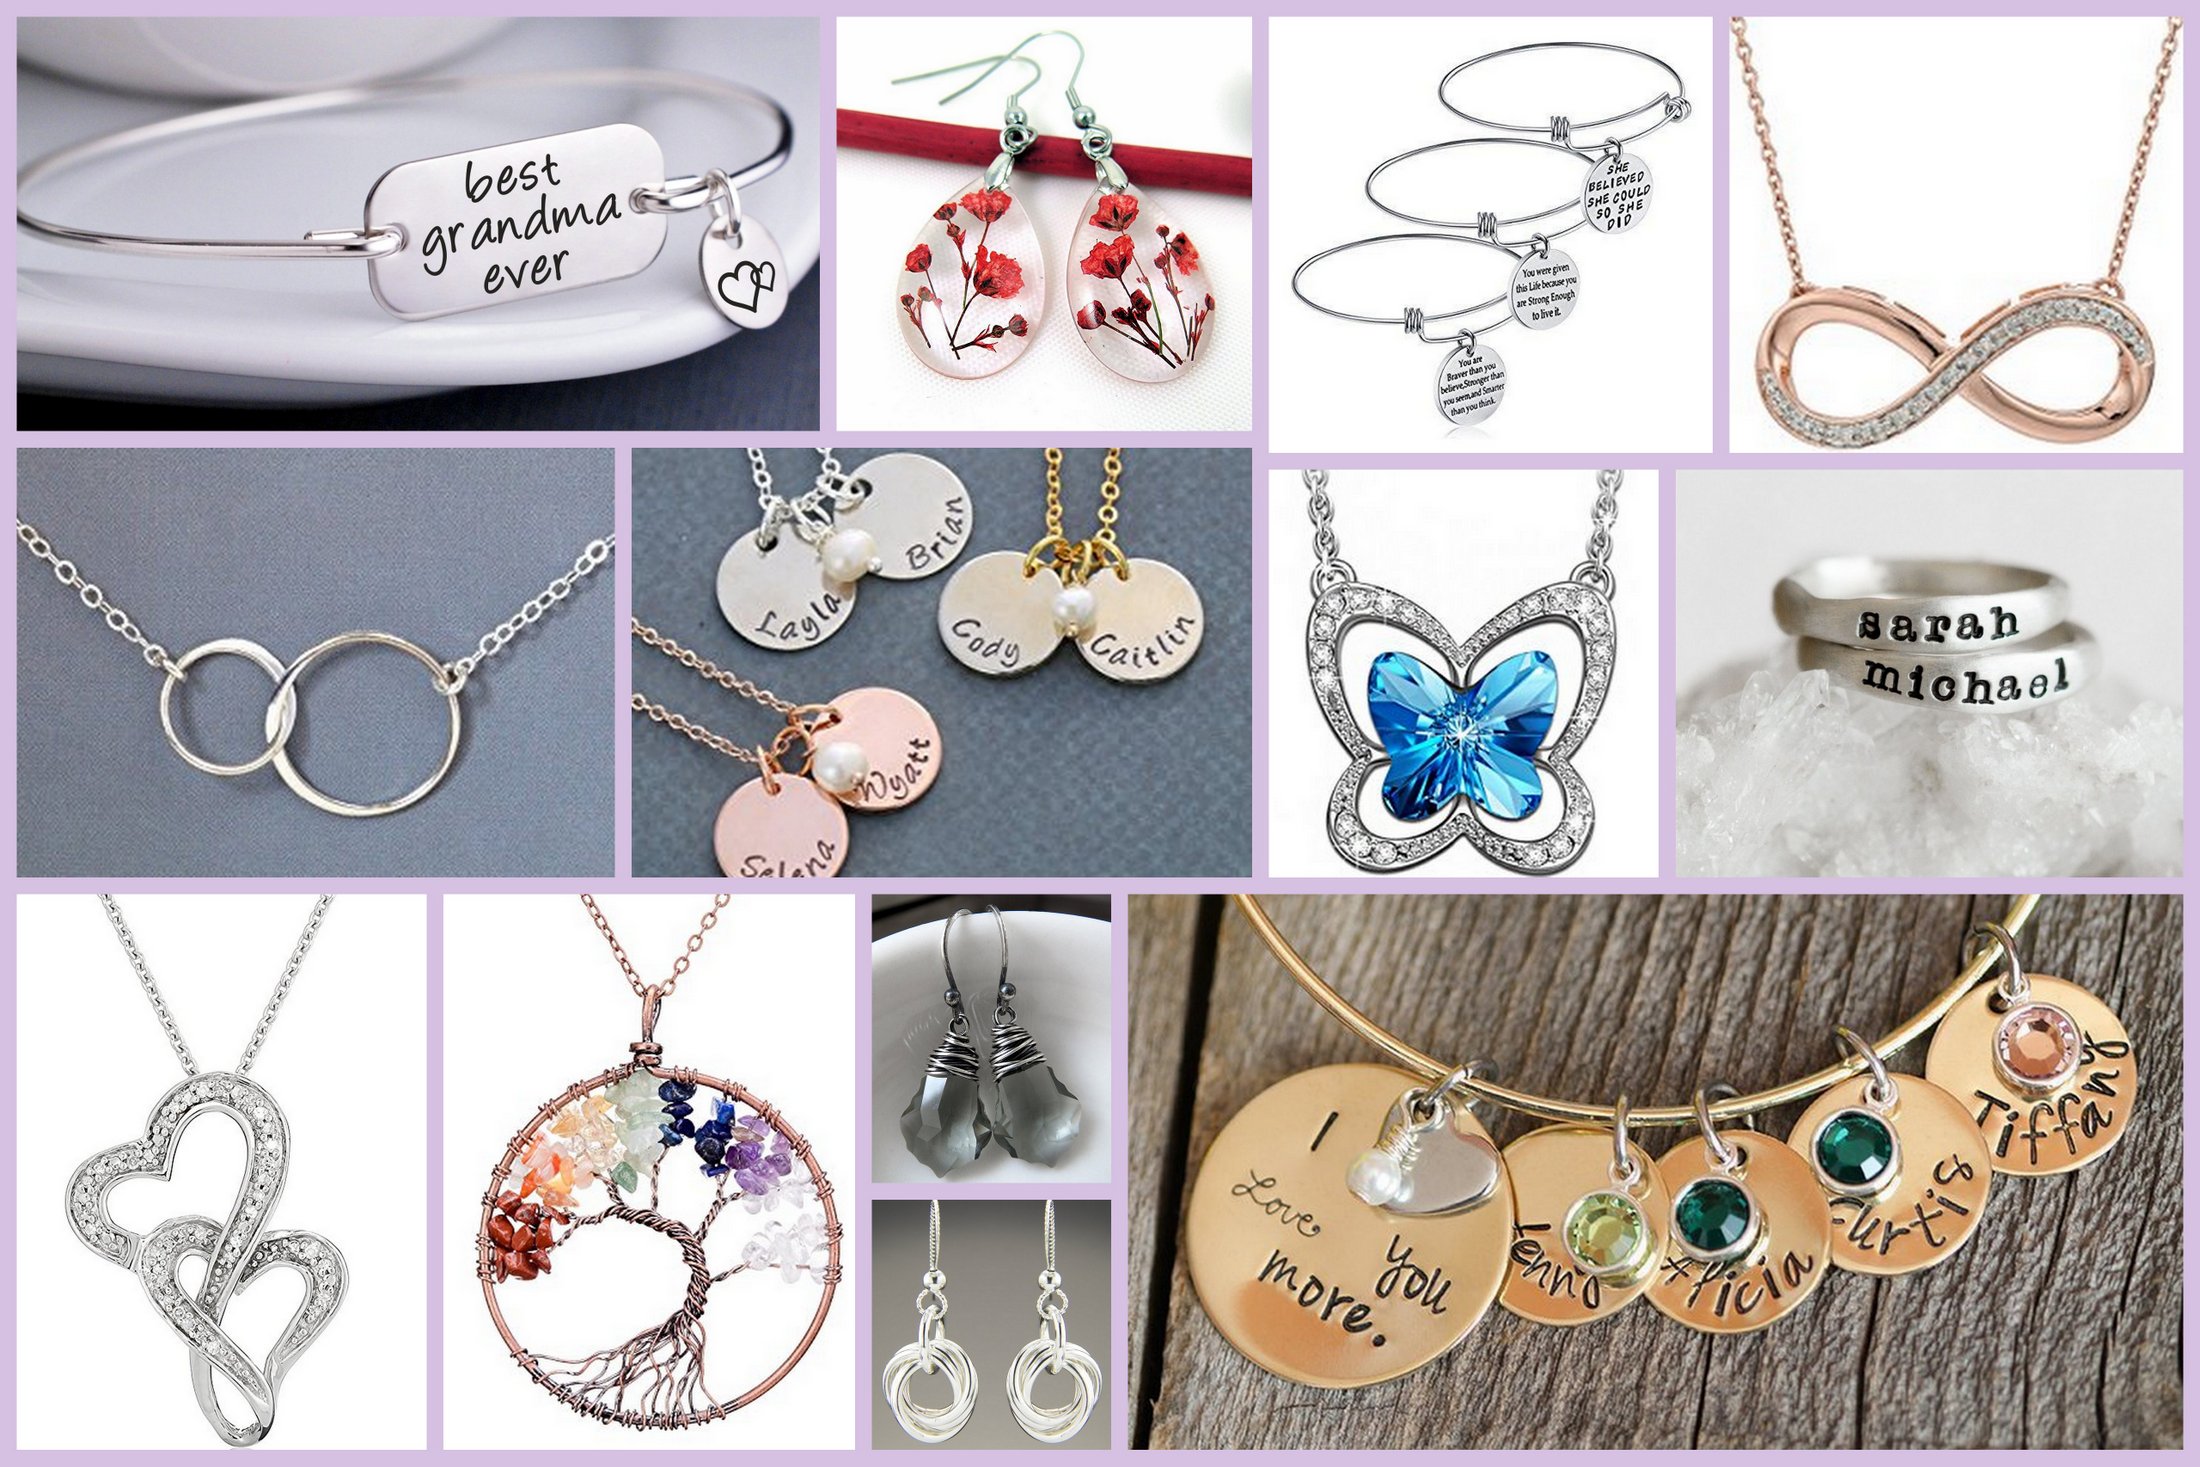 Mother's Day gifts that sparkle & shine: Jewelry